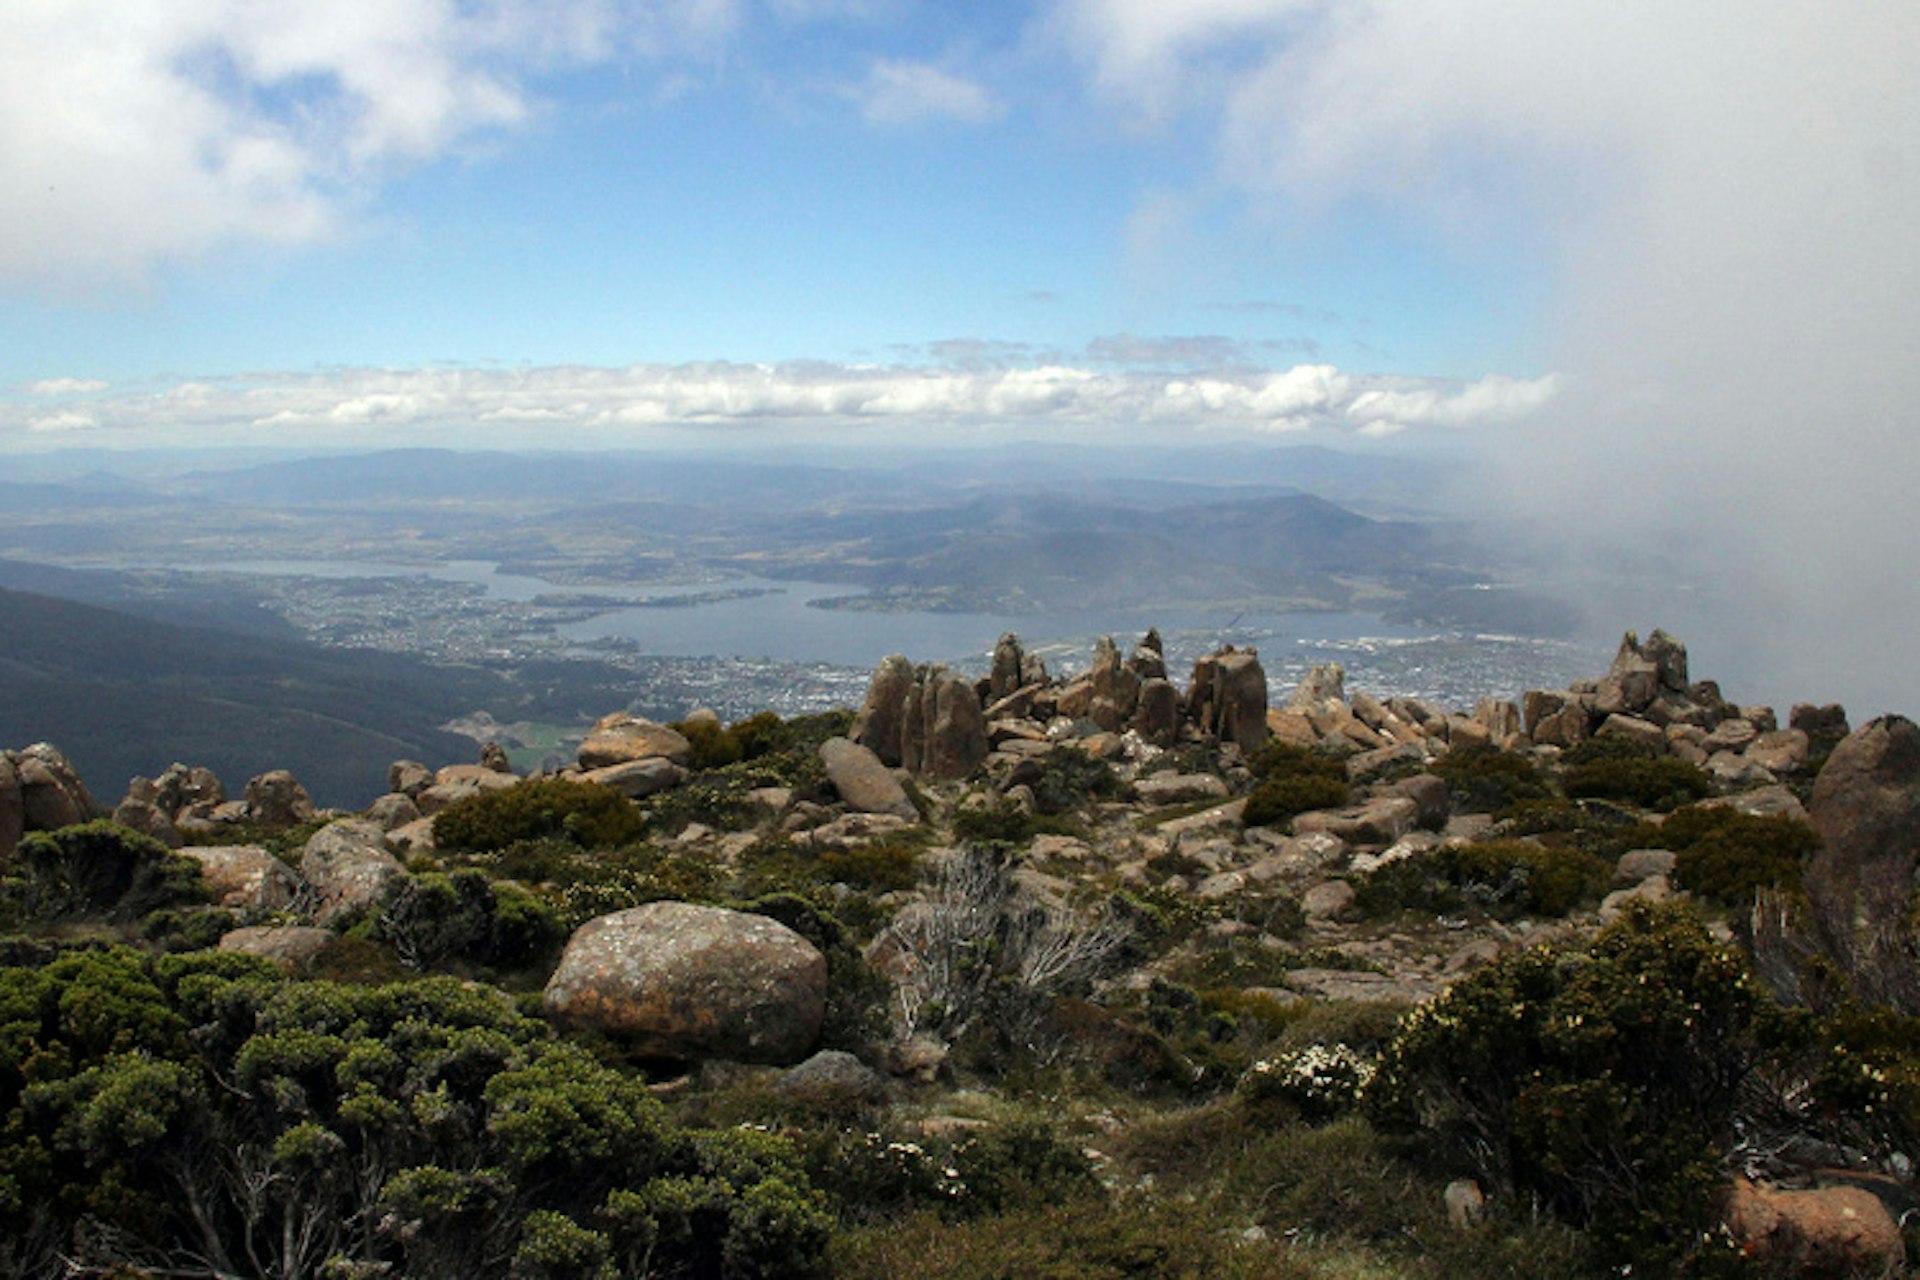 Views from the summit of Mt Wellington / Image by Jeffowenphotos / CC BY 2.0